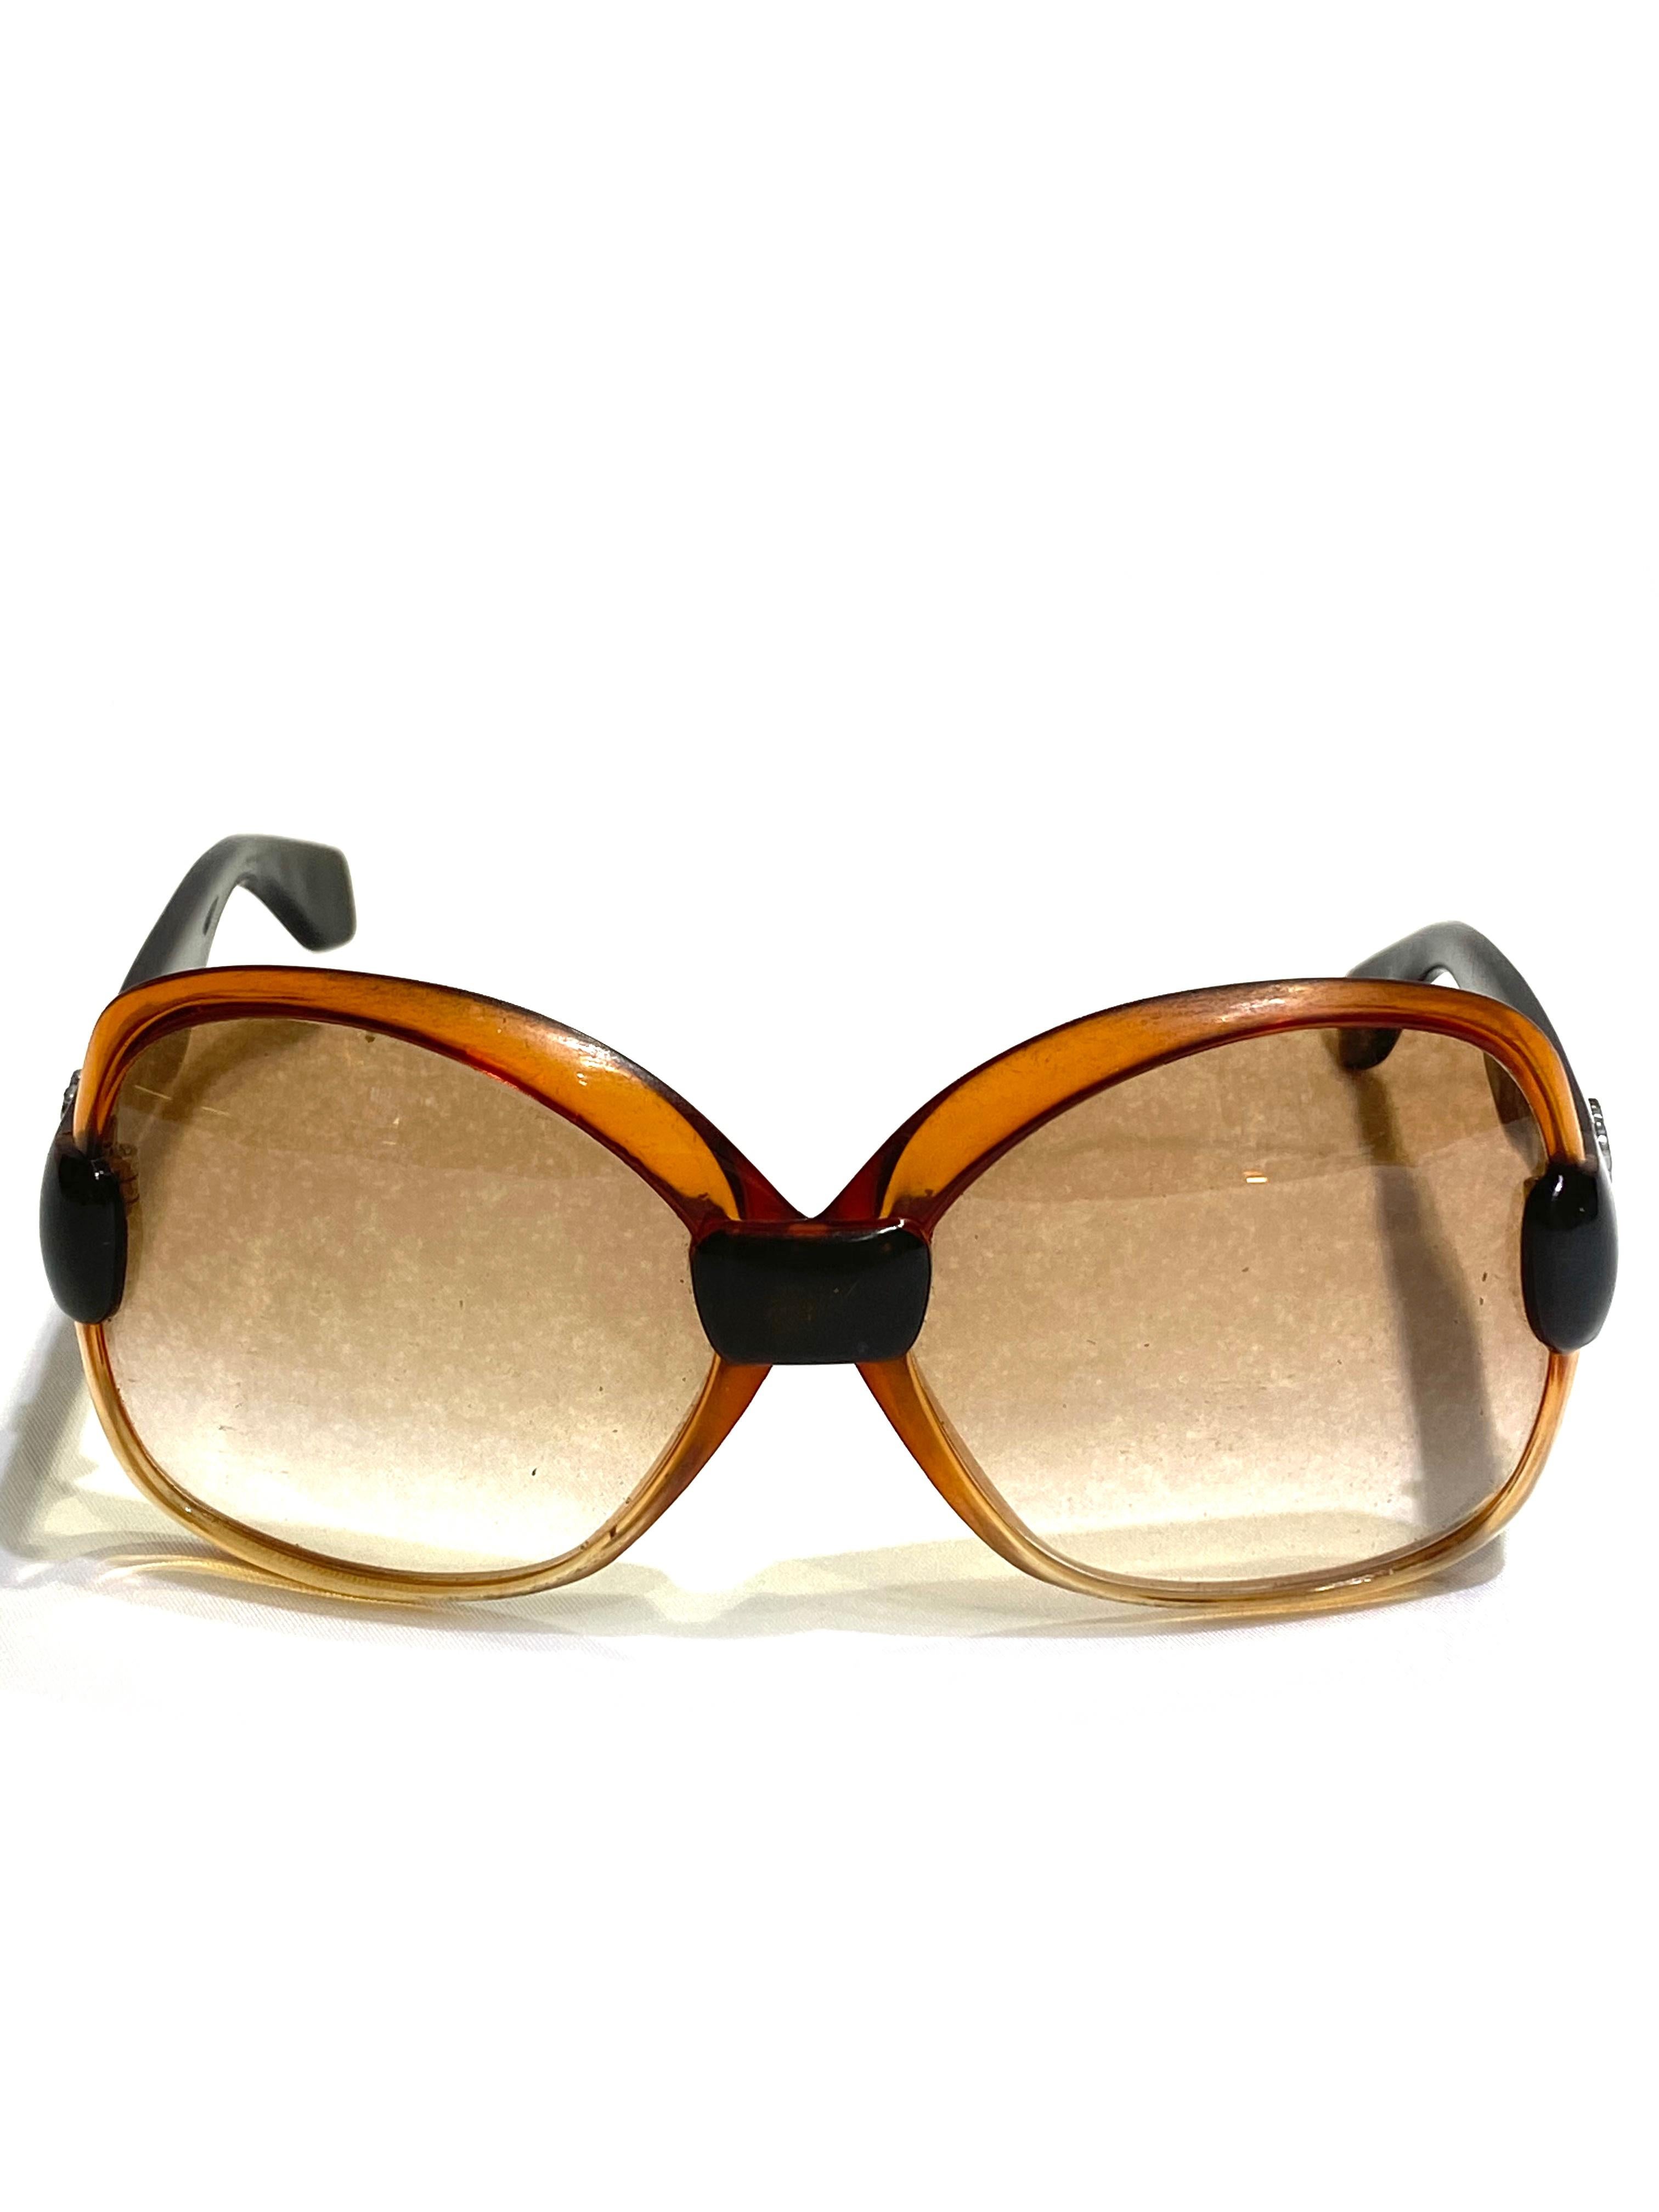 Product details:

Circa 1970.
Featuring clear brown and black matte finish frames, round square light brown gradient lens, silver tone YSL logo on the sides.
Signed Yves Saint Laurent Paris 541.
Made in France.